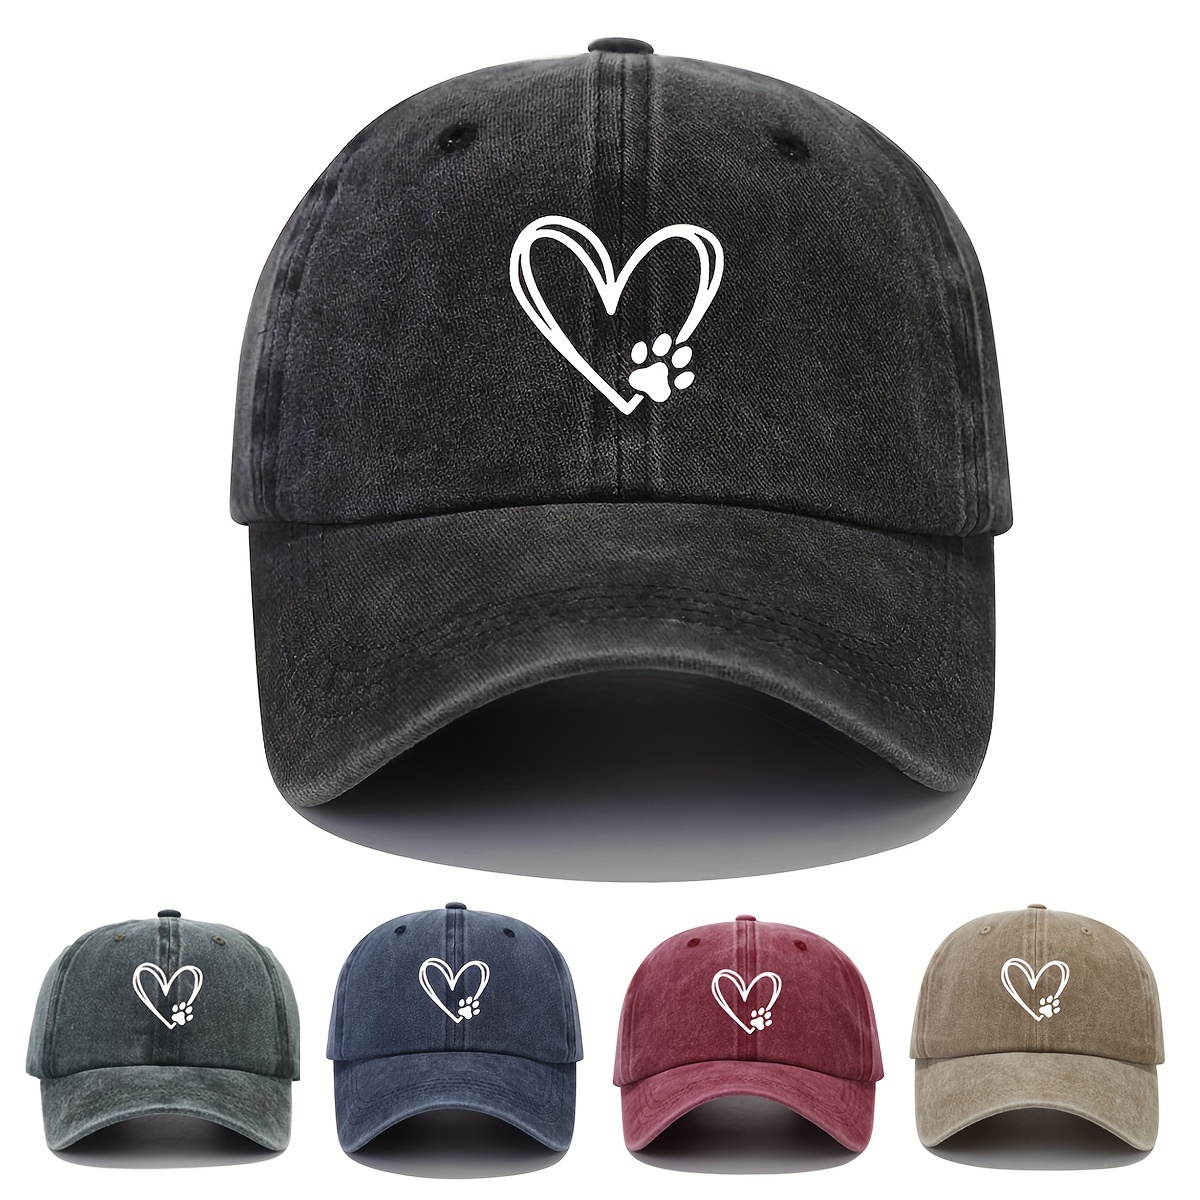 

Unisex Vintage Washed Distressed Baseball Cap, Adjustable Size Cotton Hat With Love Heart Cat Paw Print, Outdoor Casual Hat